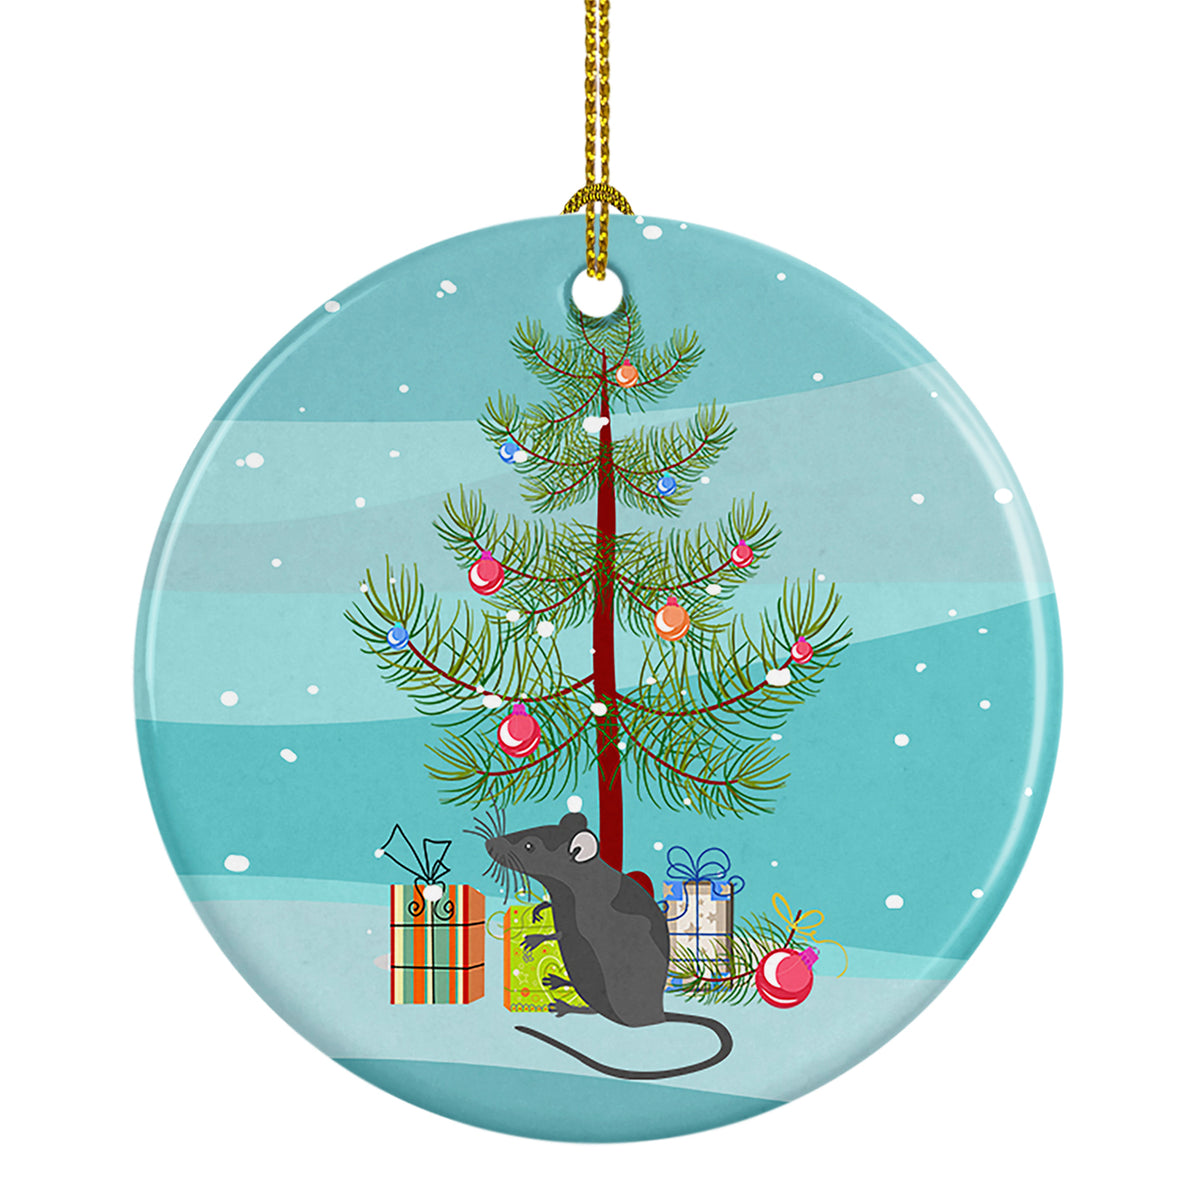 Buy this Satin Mouse Merry Christmas Ceramic Ornament